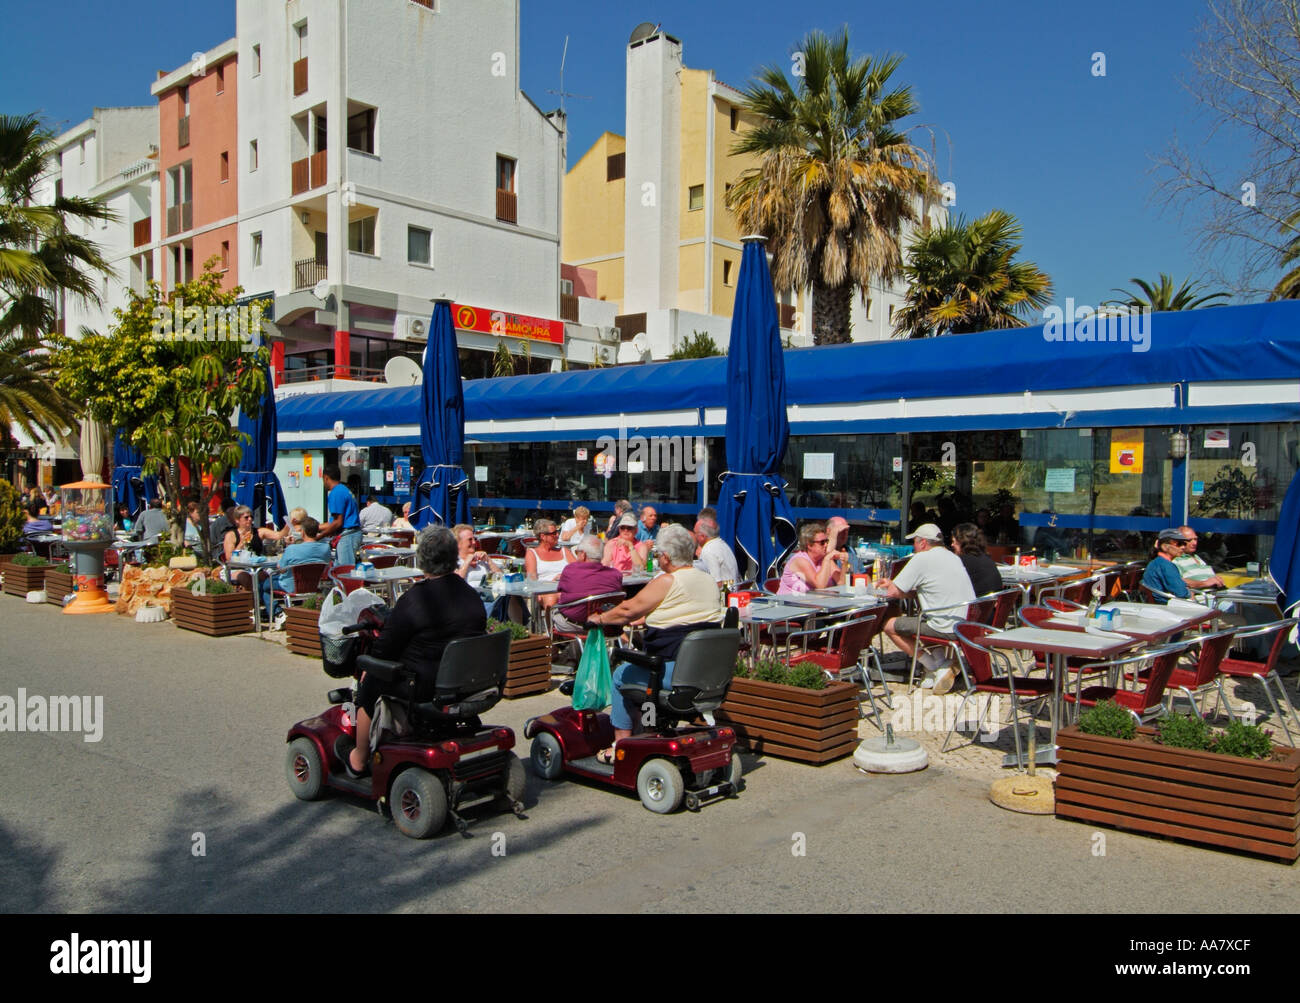 Motorised mobility scooters for disabled people on holiday near restaurant in Vilamoura marina Algarve Portugal EU Europe Stock Photo